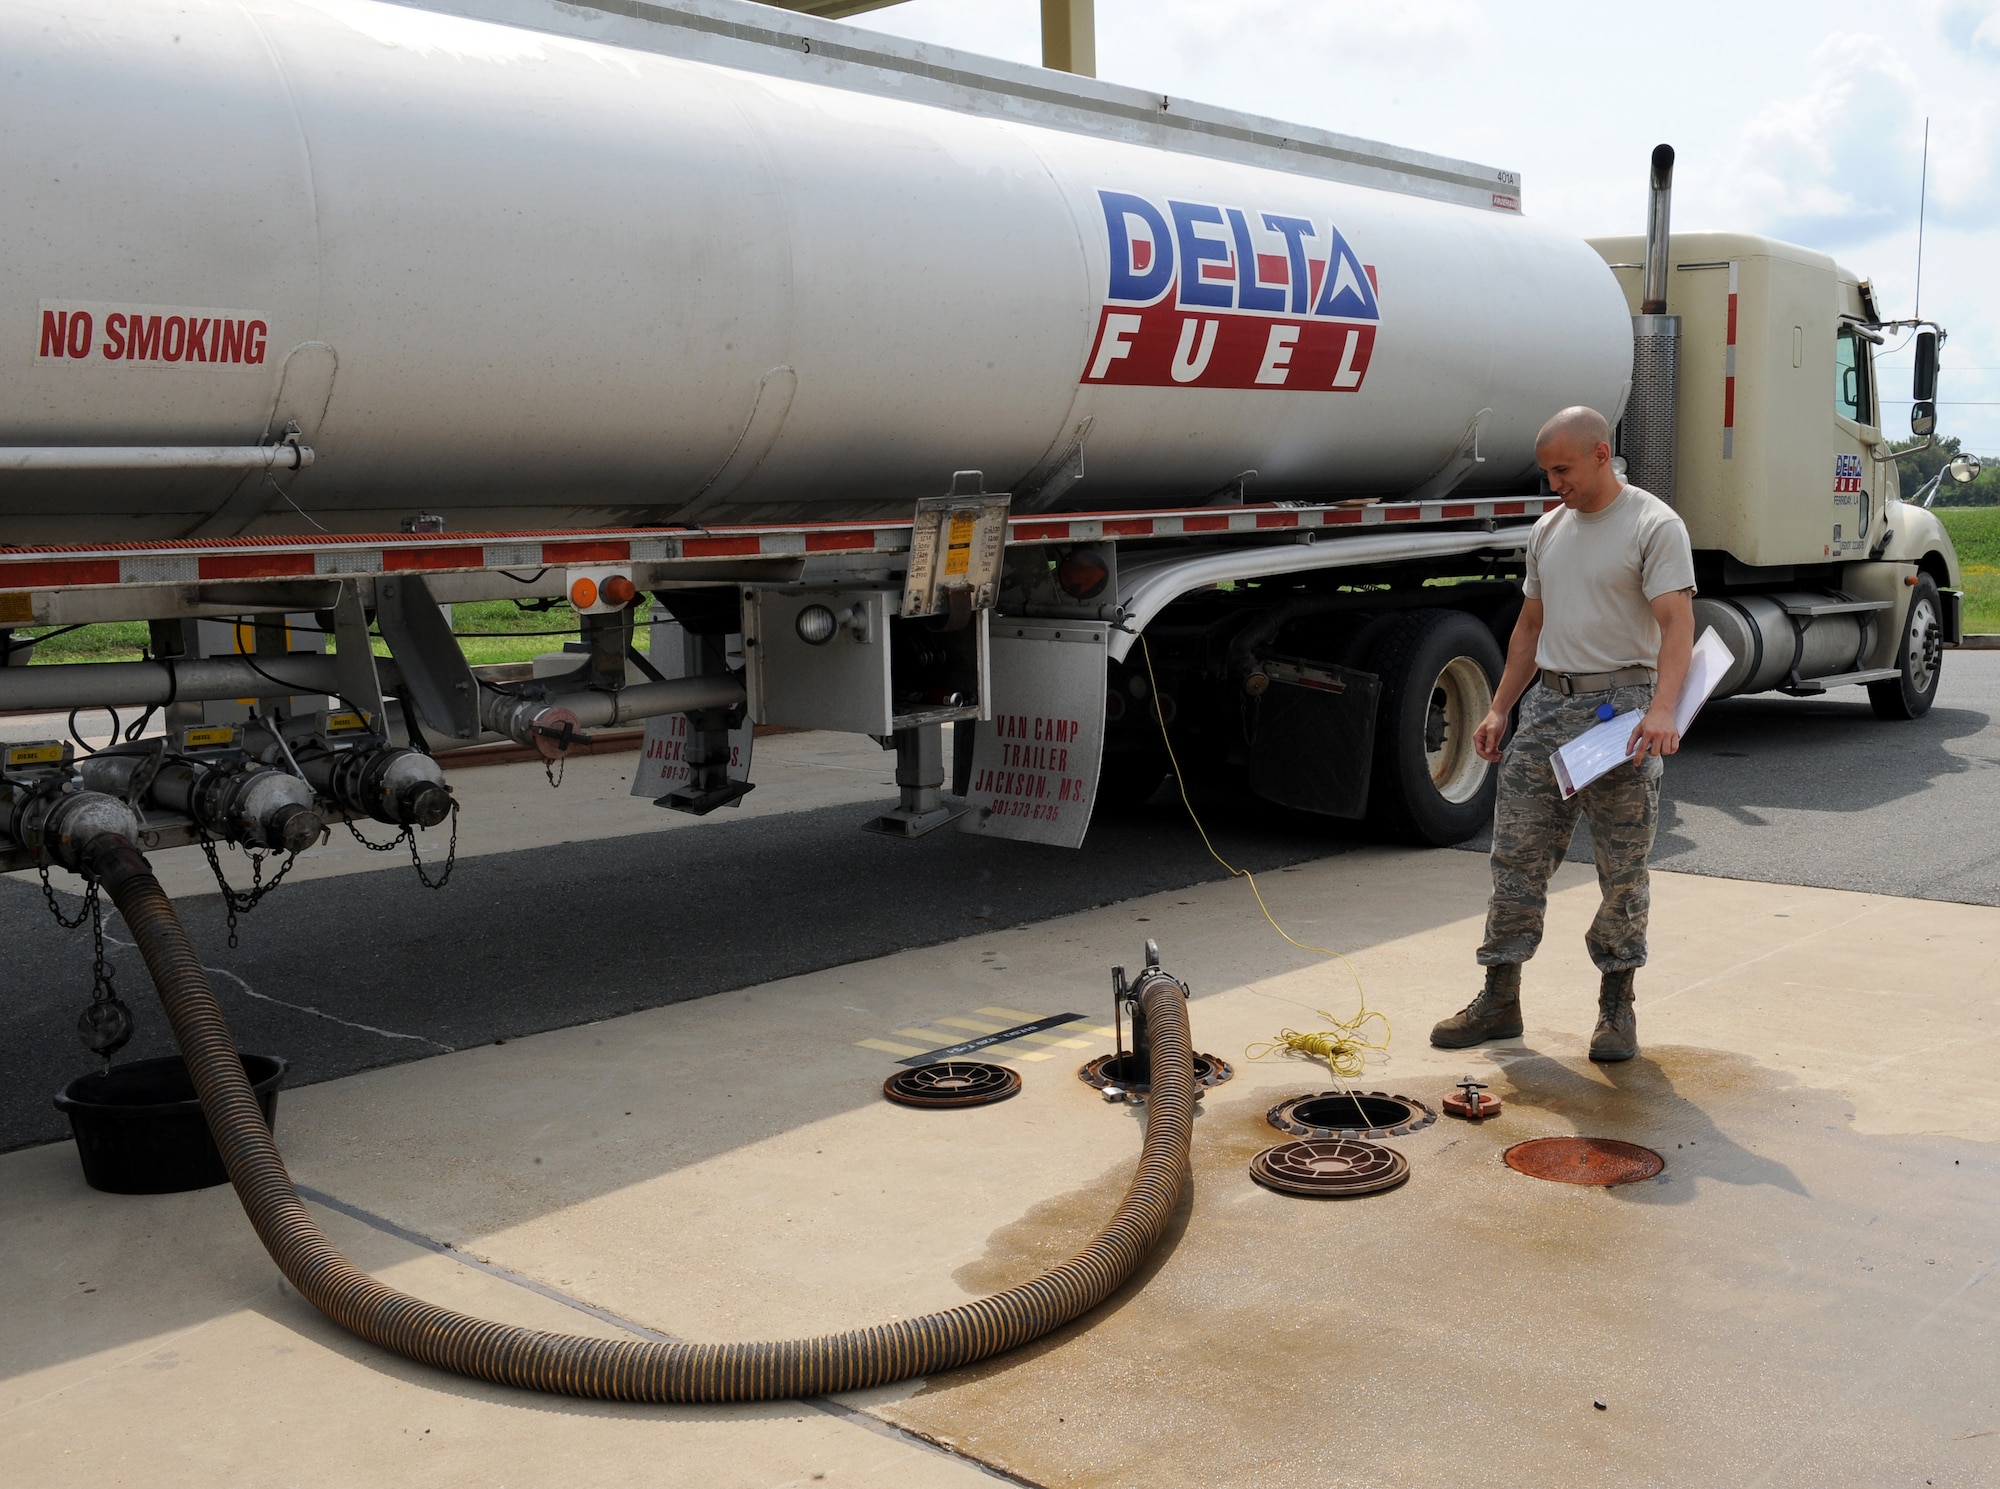 Senior Airman Derek McLemore, 2nd Logistics Readiness Squadron facilities maintainer, ensures biodiesel is being properly distributed into a fuel station on Barksdale Air Force Base, La., Sept. 18. McLemore goes through a checklist of tasks that need to be done while fuel is being distributed into the base. (U.S. Air Force photo/Airman 1st Class Benjamin Gonsier)(RELEASED)
